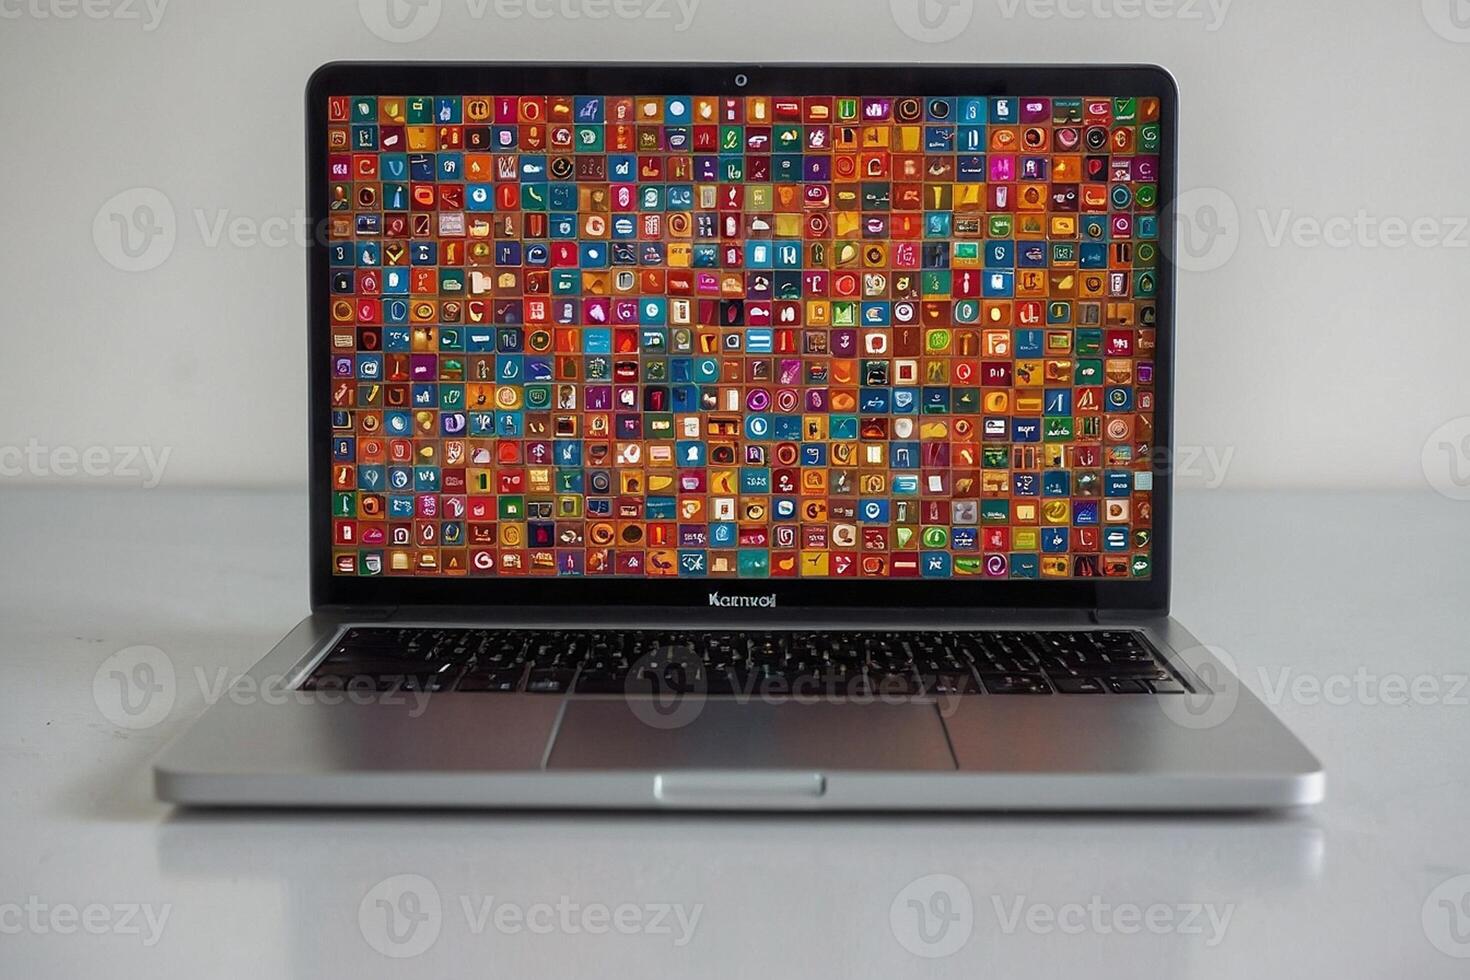 a laptop with colorful squares on the screen photo